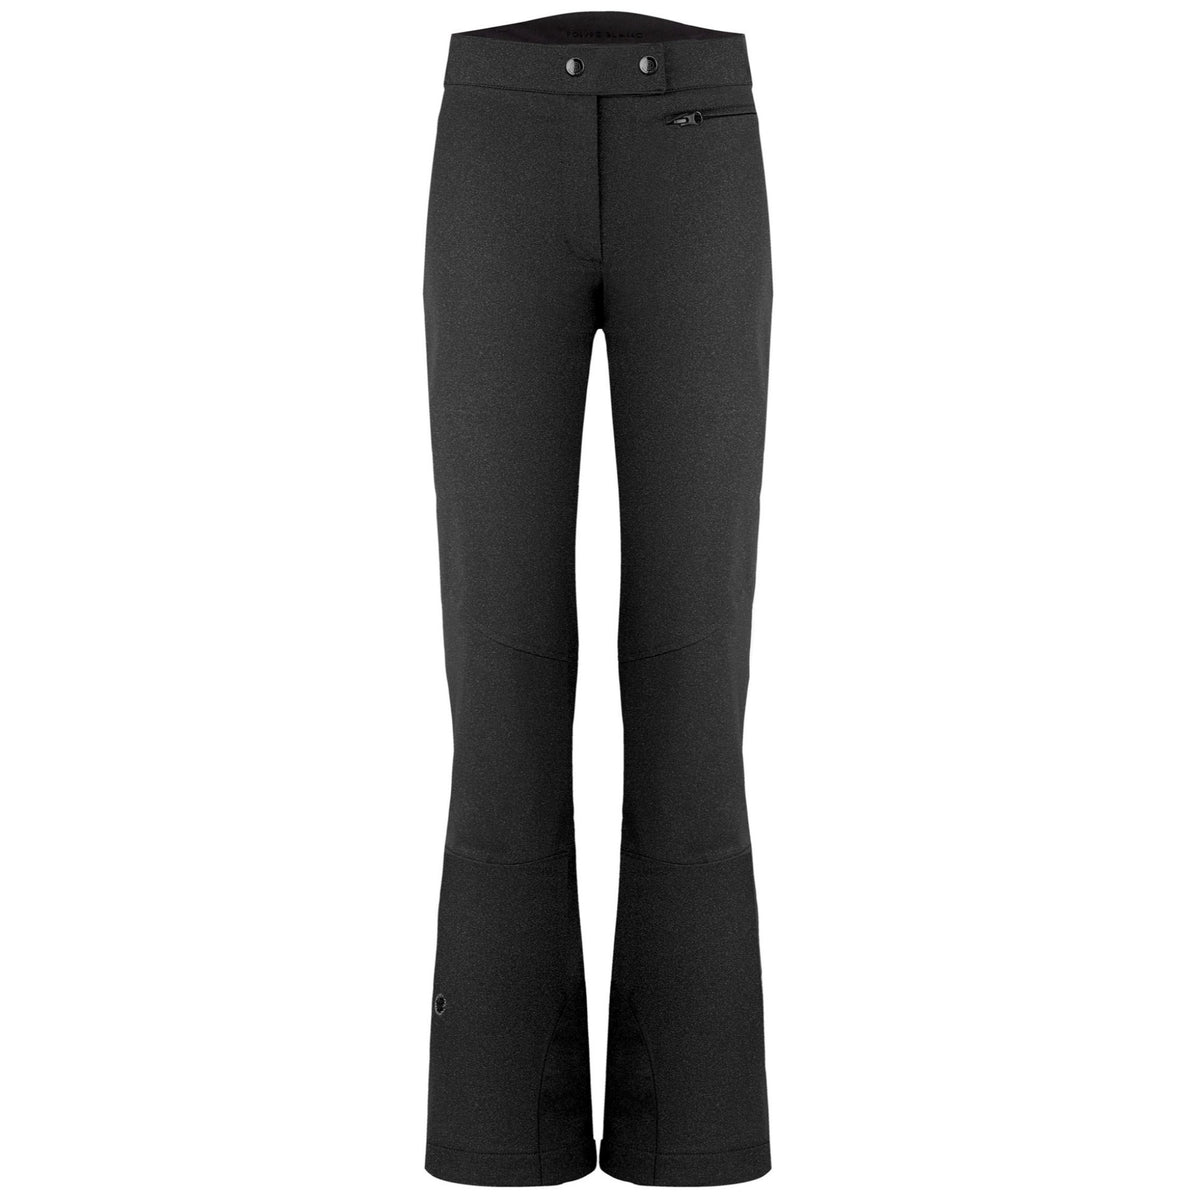 Ski and snow pants for women – Oberson